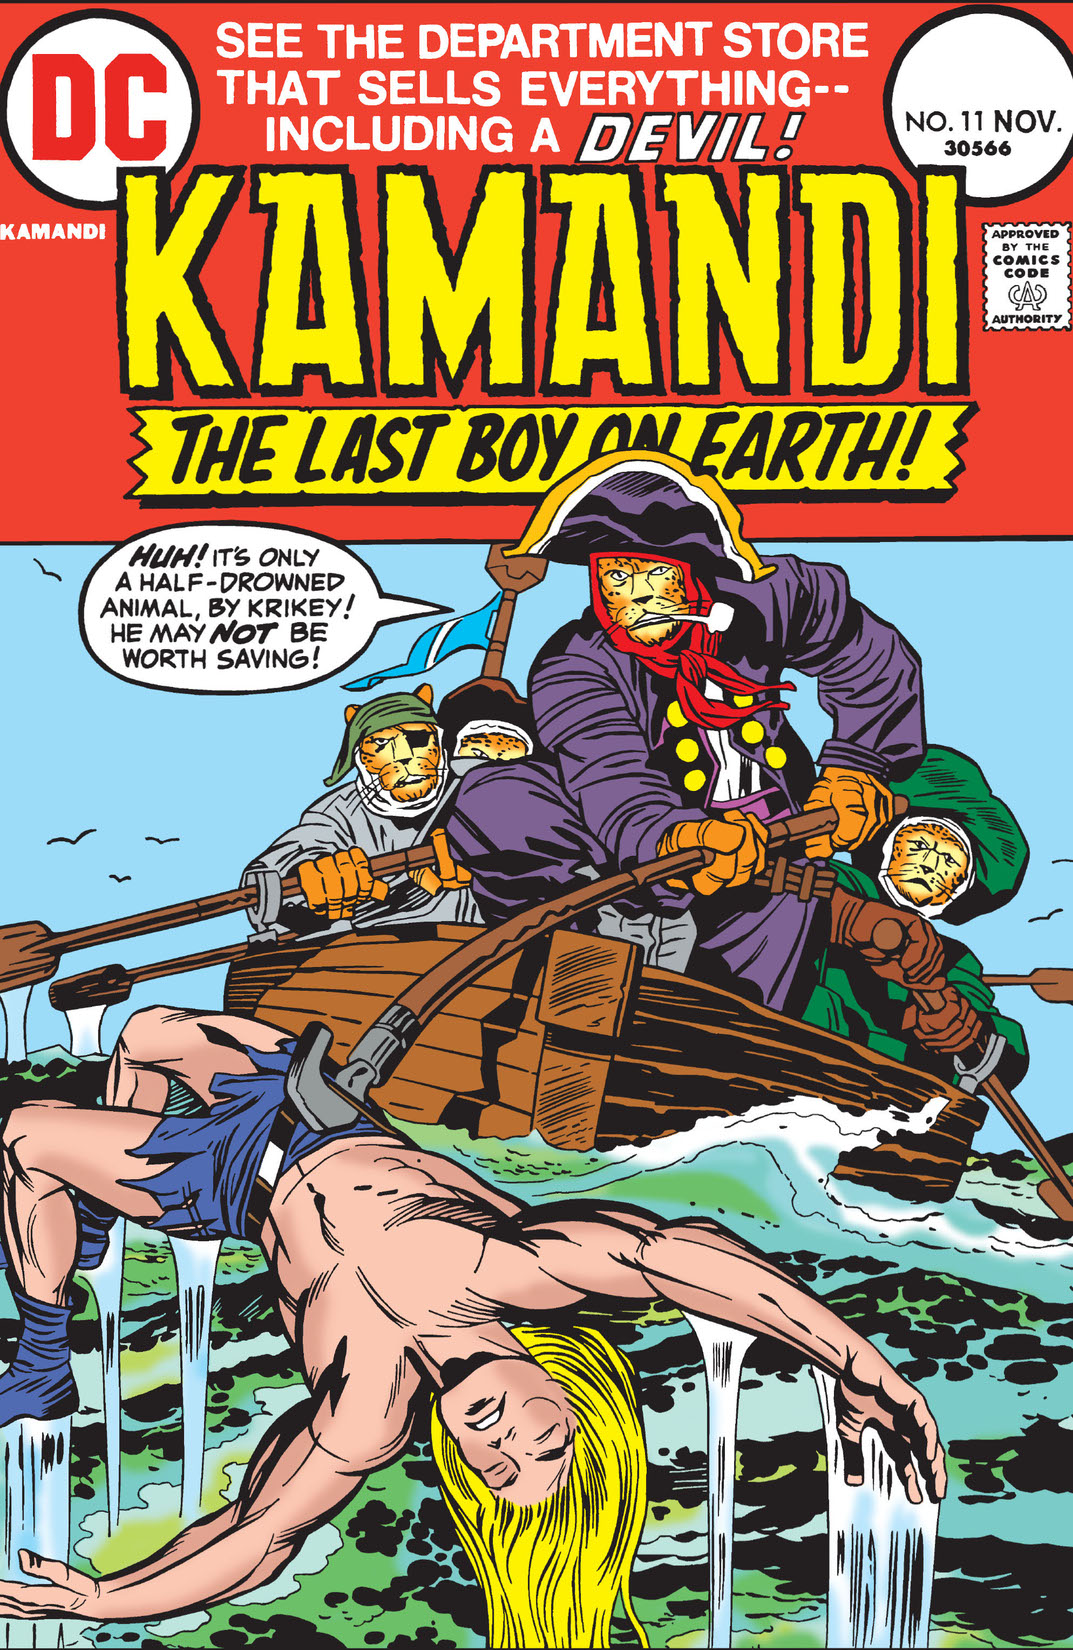 Kamandi: The Last Boy on Earth #11 preview images